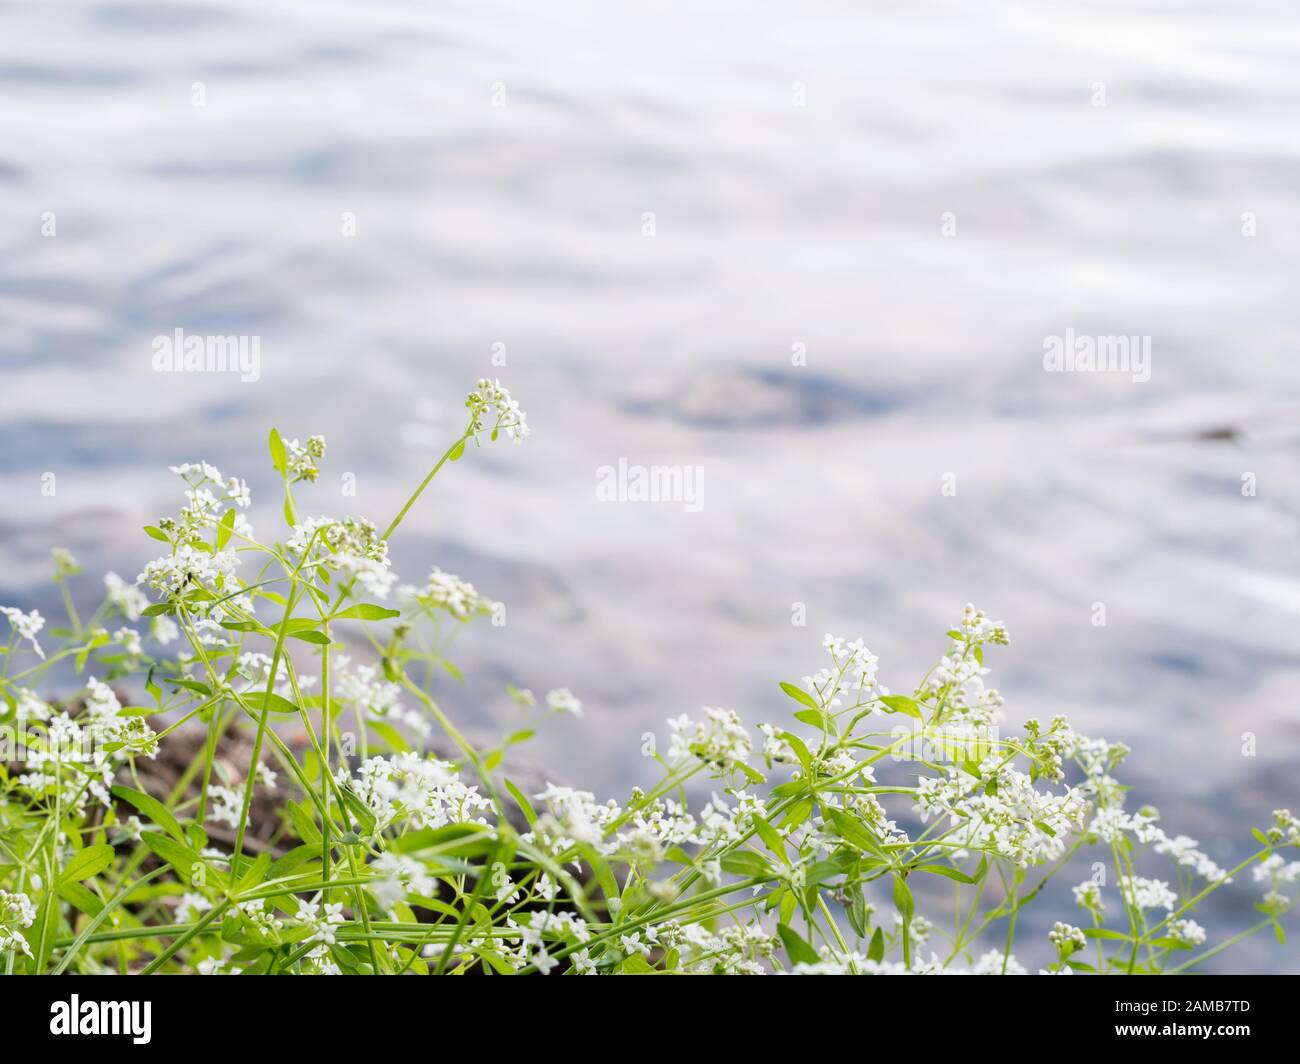 Marsh-bedstraw shore plant by lake Stock Photo